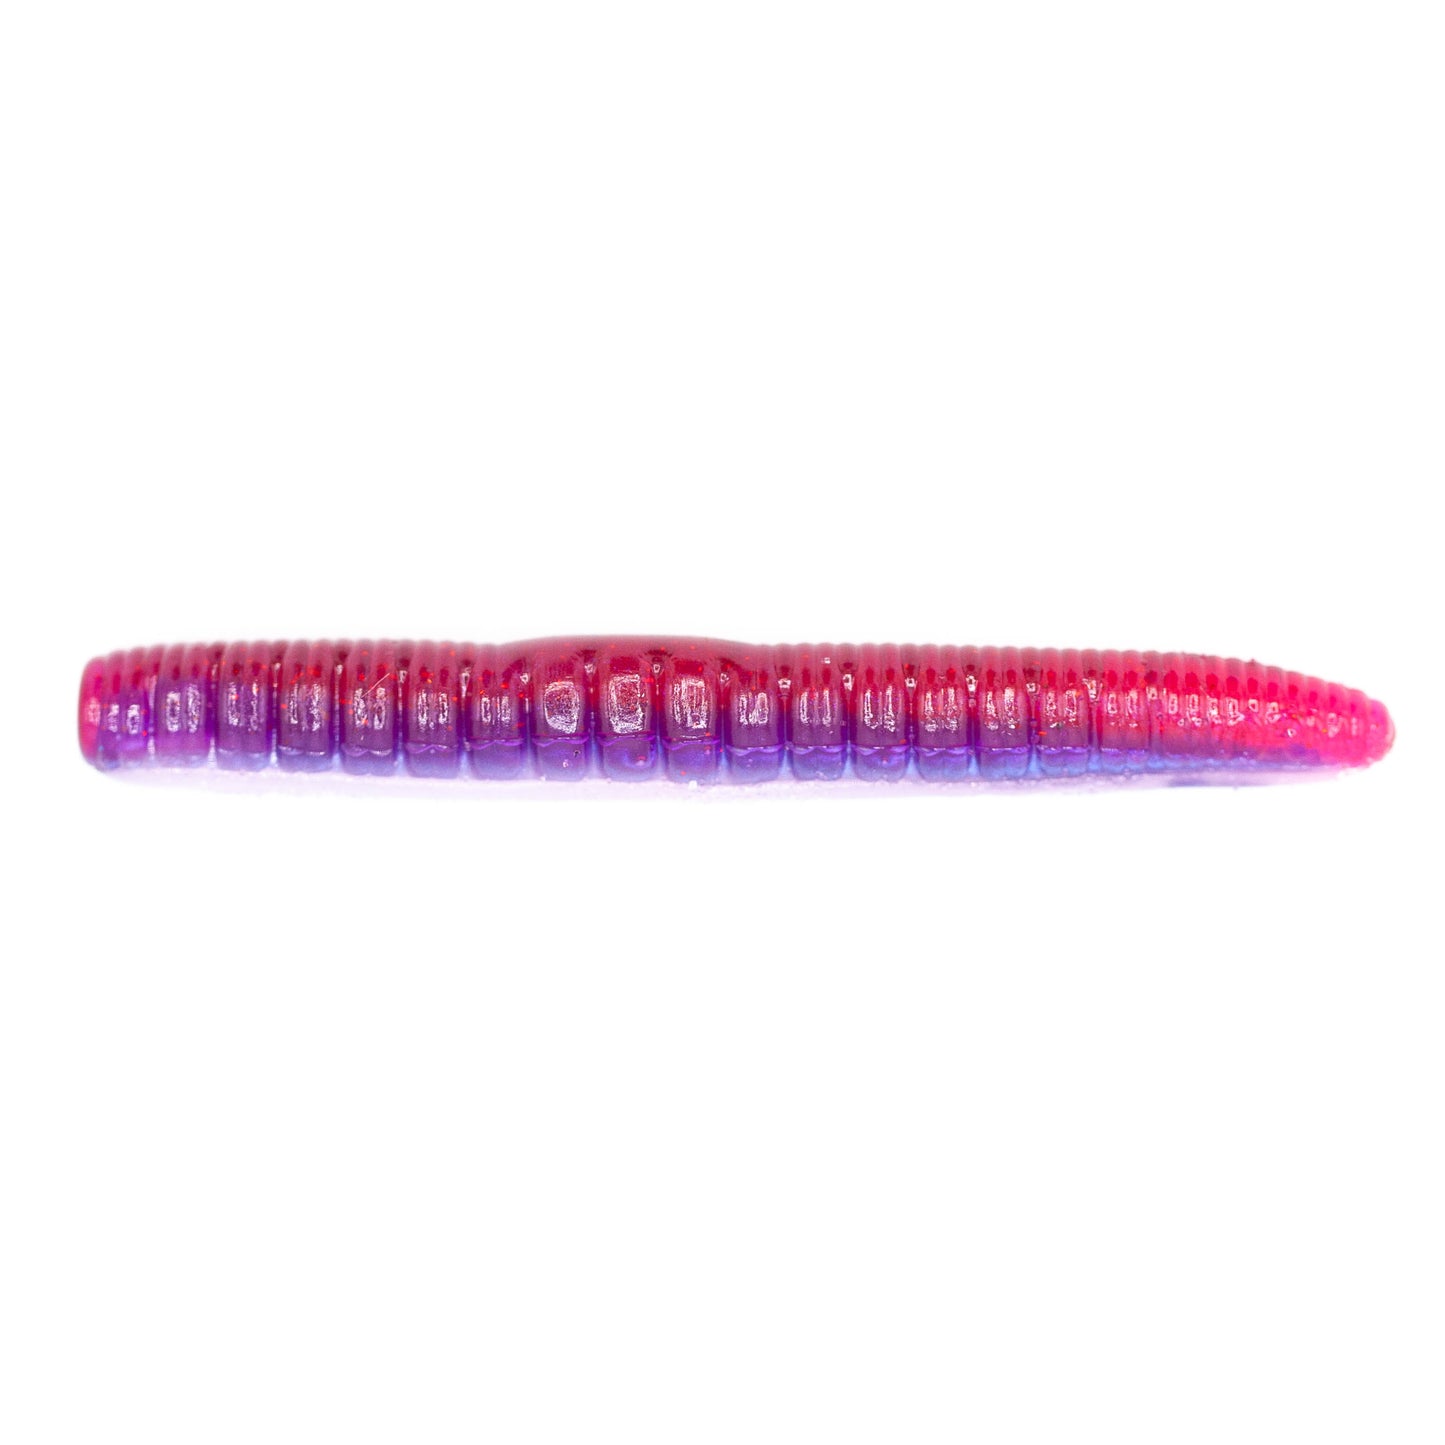 Roboworm 3" Ned 8 per pack